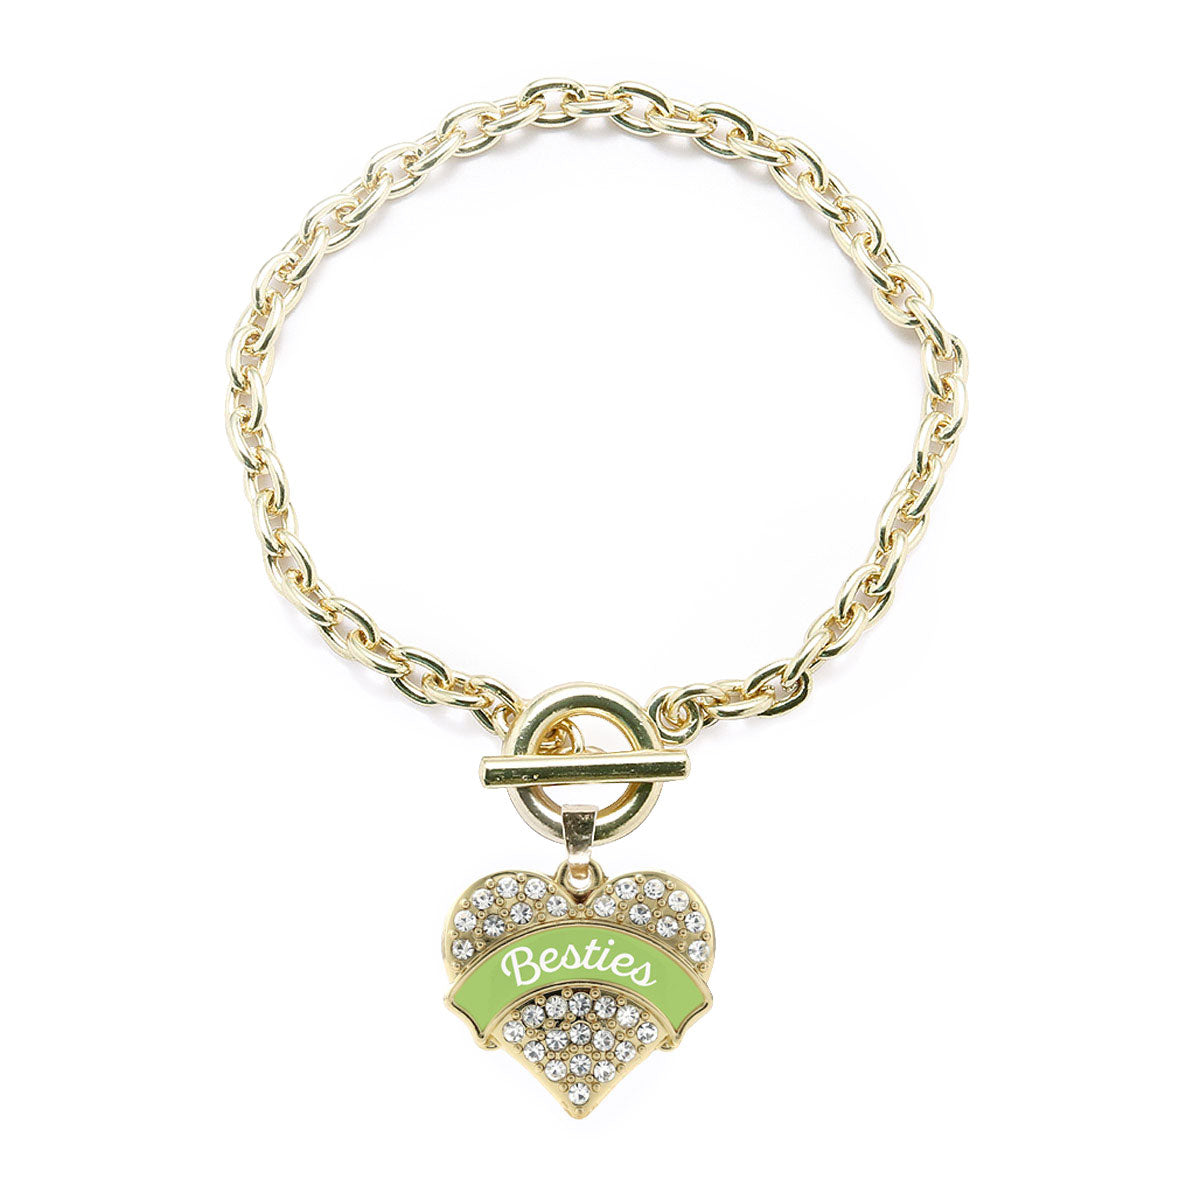 Gold Sage Green Besties Pave Heart Charm Toggle Bracelet